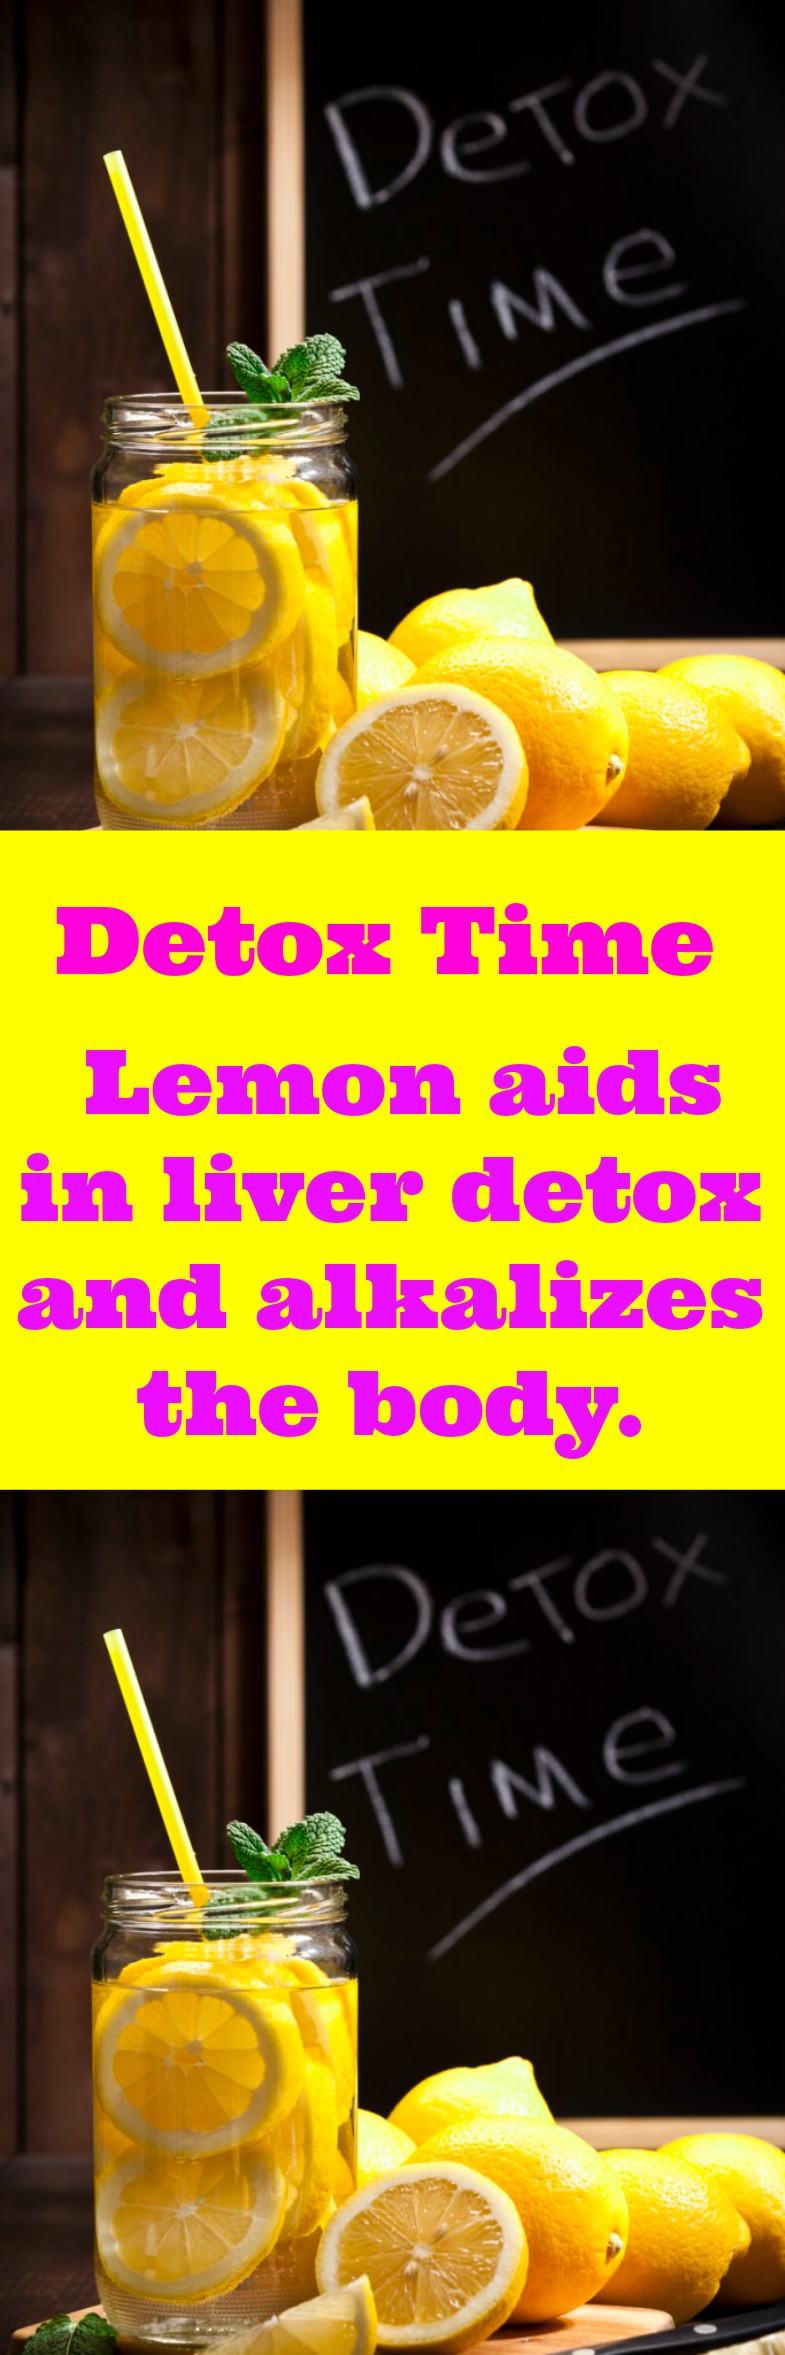 Lemon Mint Detox drink for weightloss and to reduce bloating. Lemon aids in liver detox and alkalizes the body. 